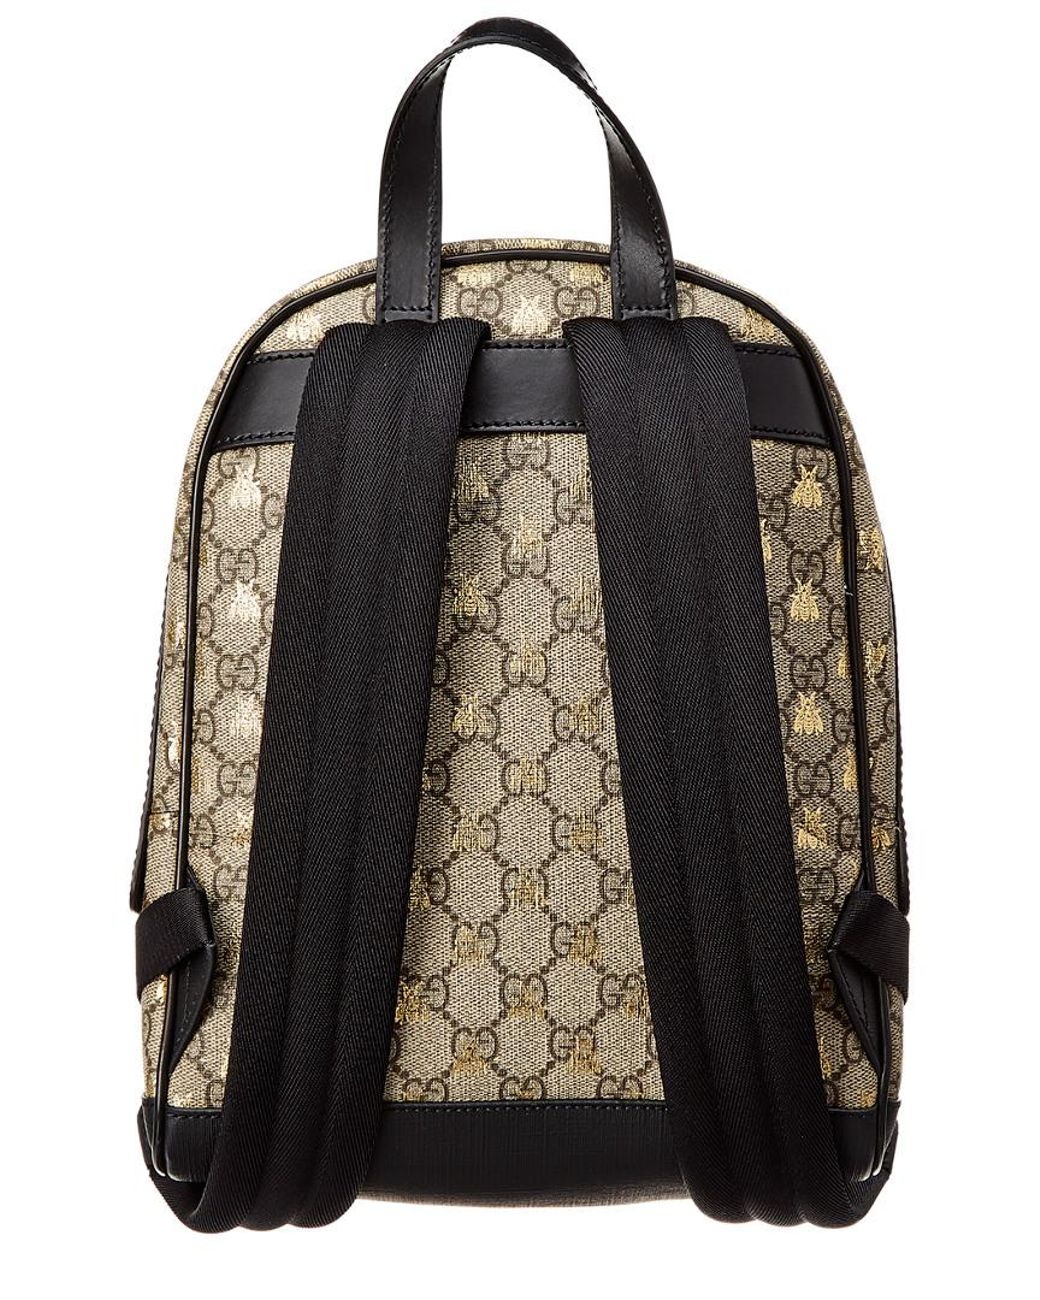 Gucci Gg Supreme Bee-print Backpack in Brown | Lyst